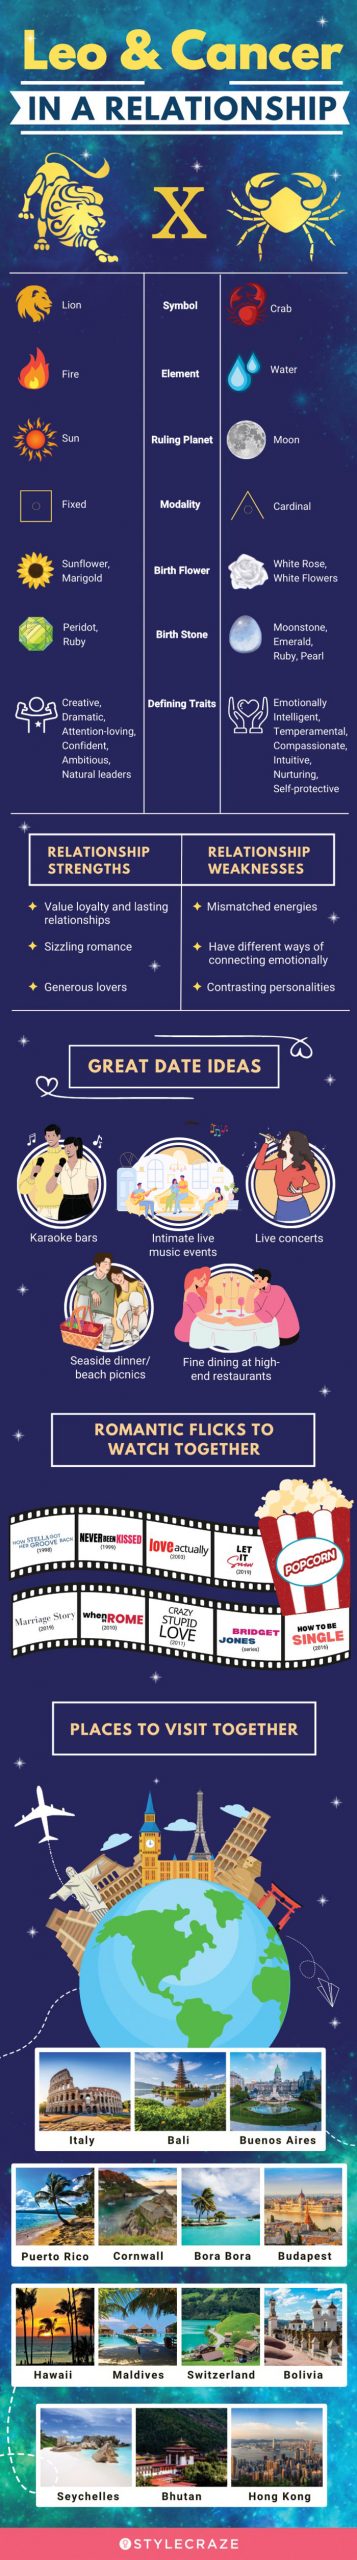 leo and cancer in a relationship (infographic)